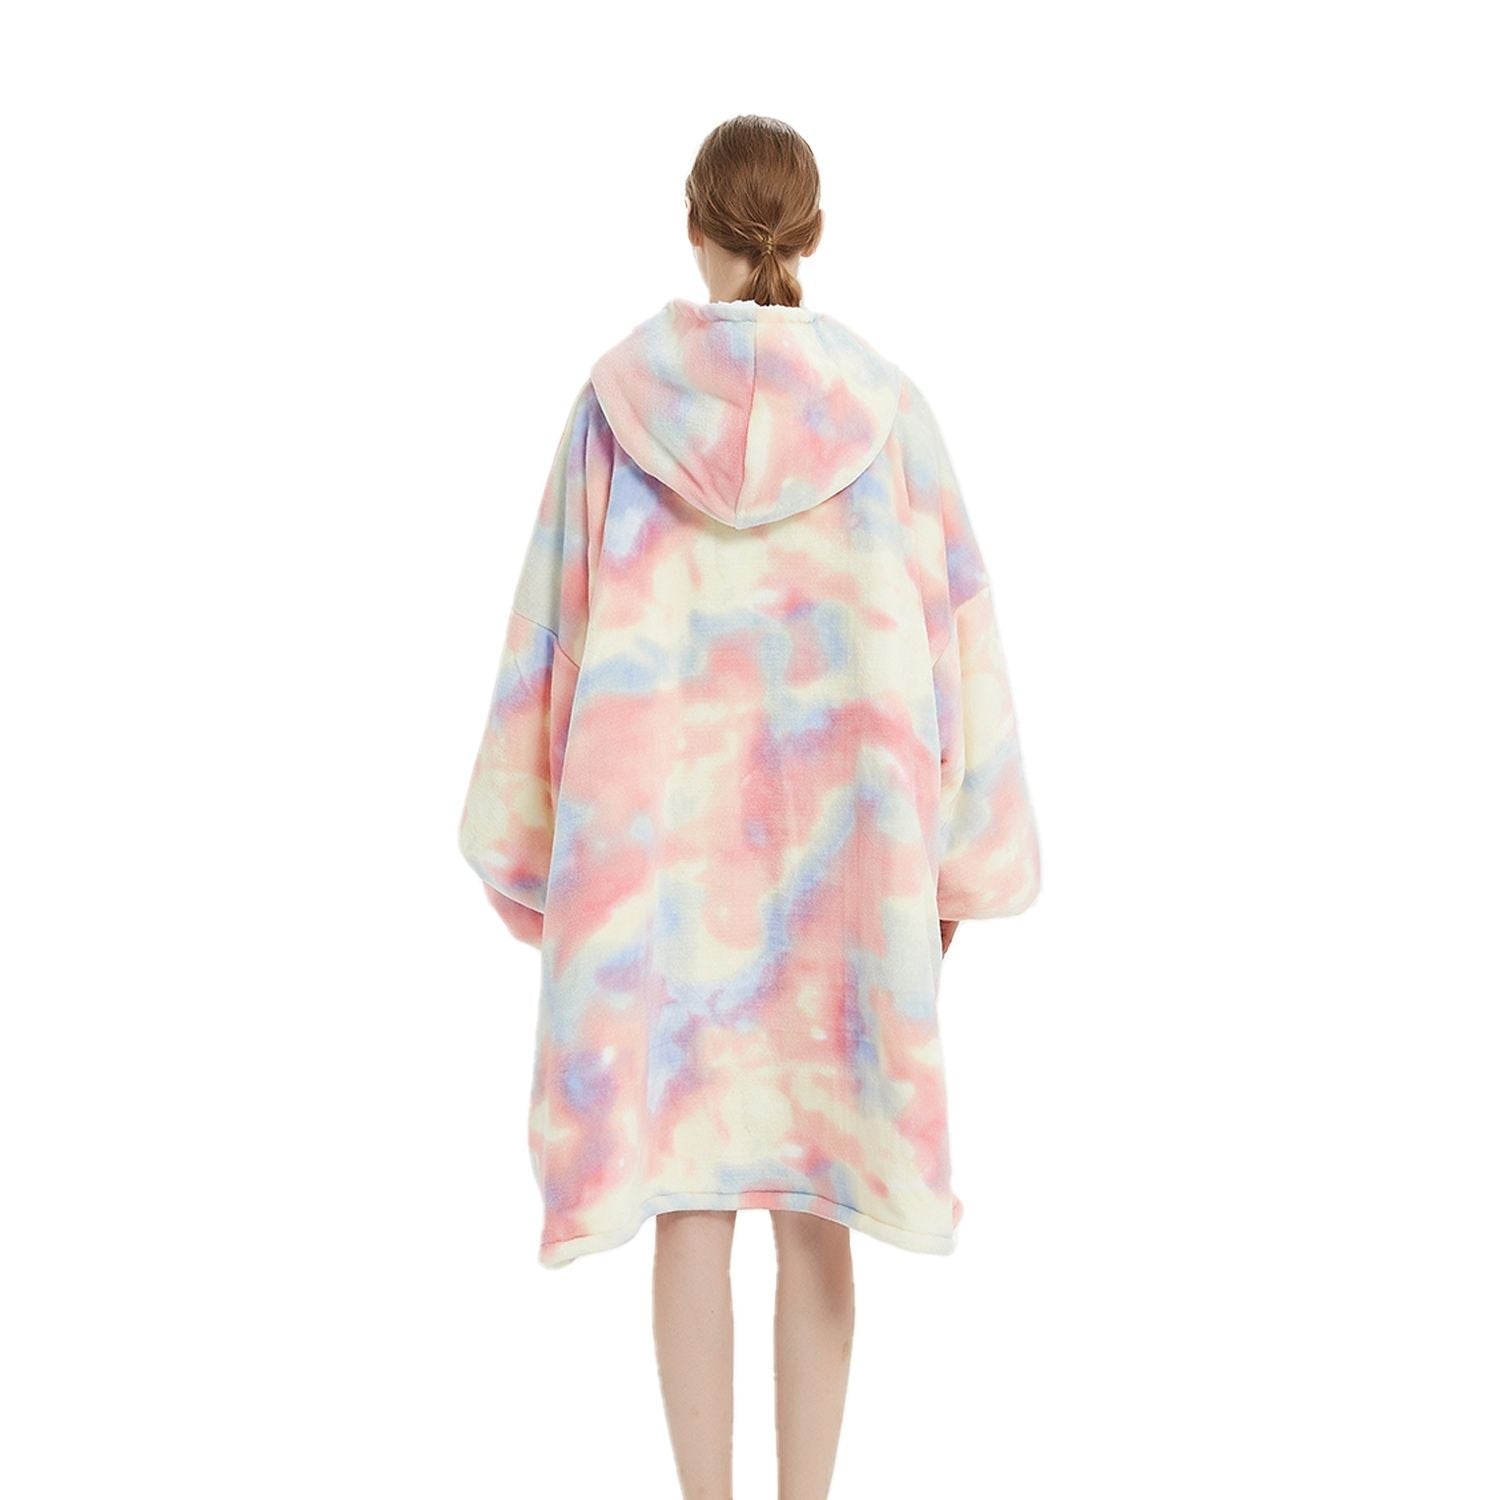 GOMINIMO Hoodie Blanket Adult Tie-Dyed Beige GO-HB-125-AYS from Deals499 at Deals499